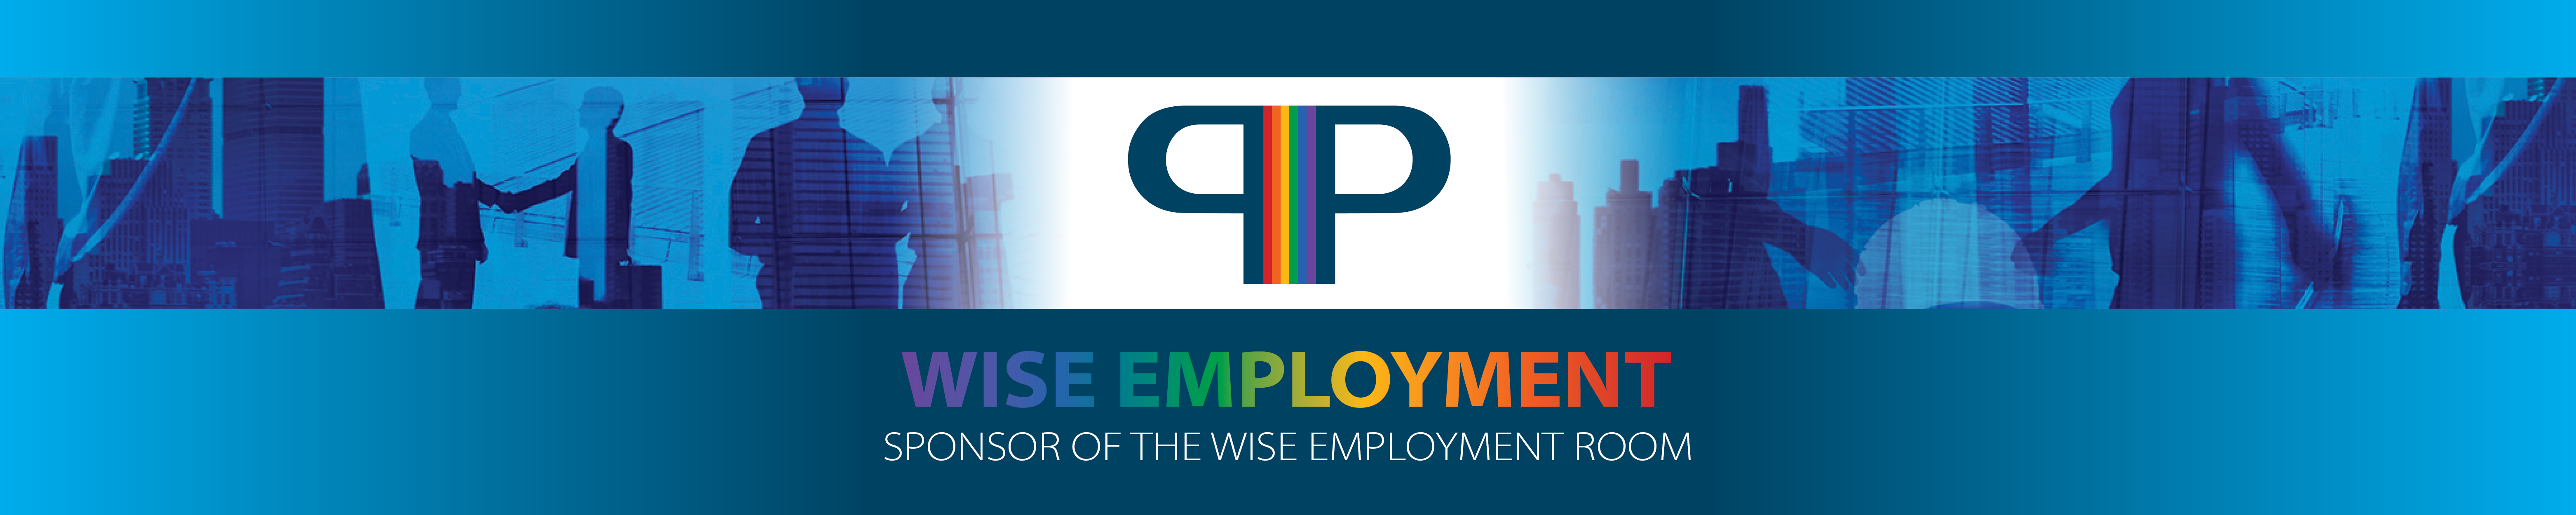 PIP_Conference_Sponsor_WiseEmployment